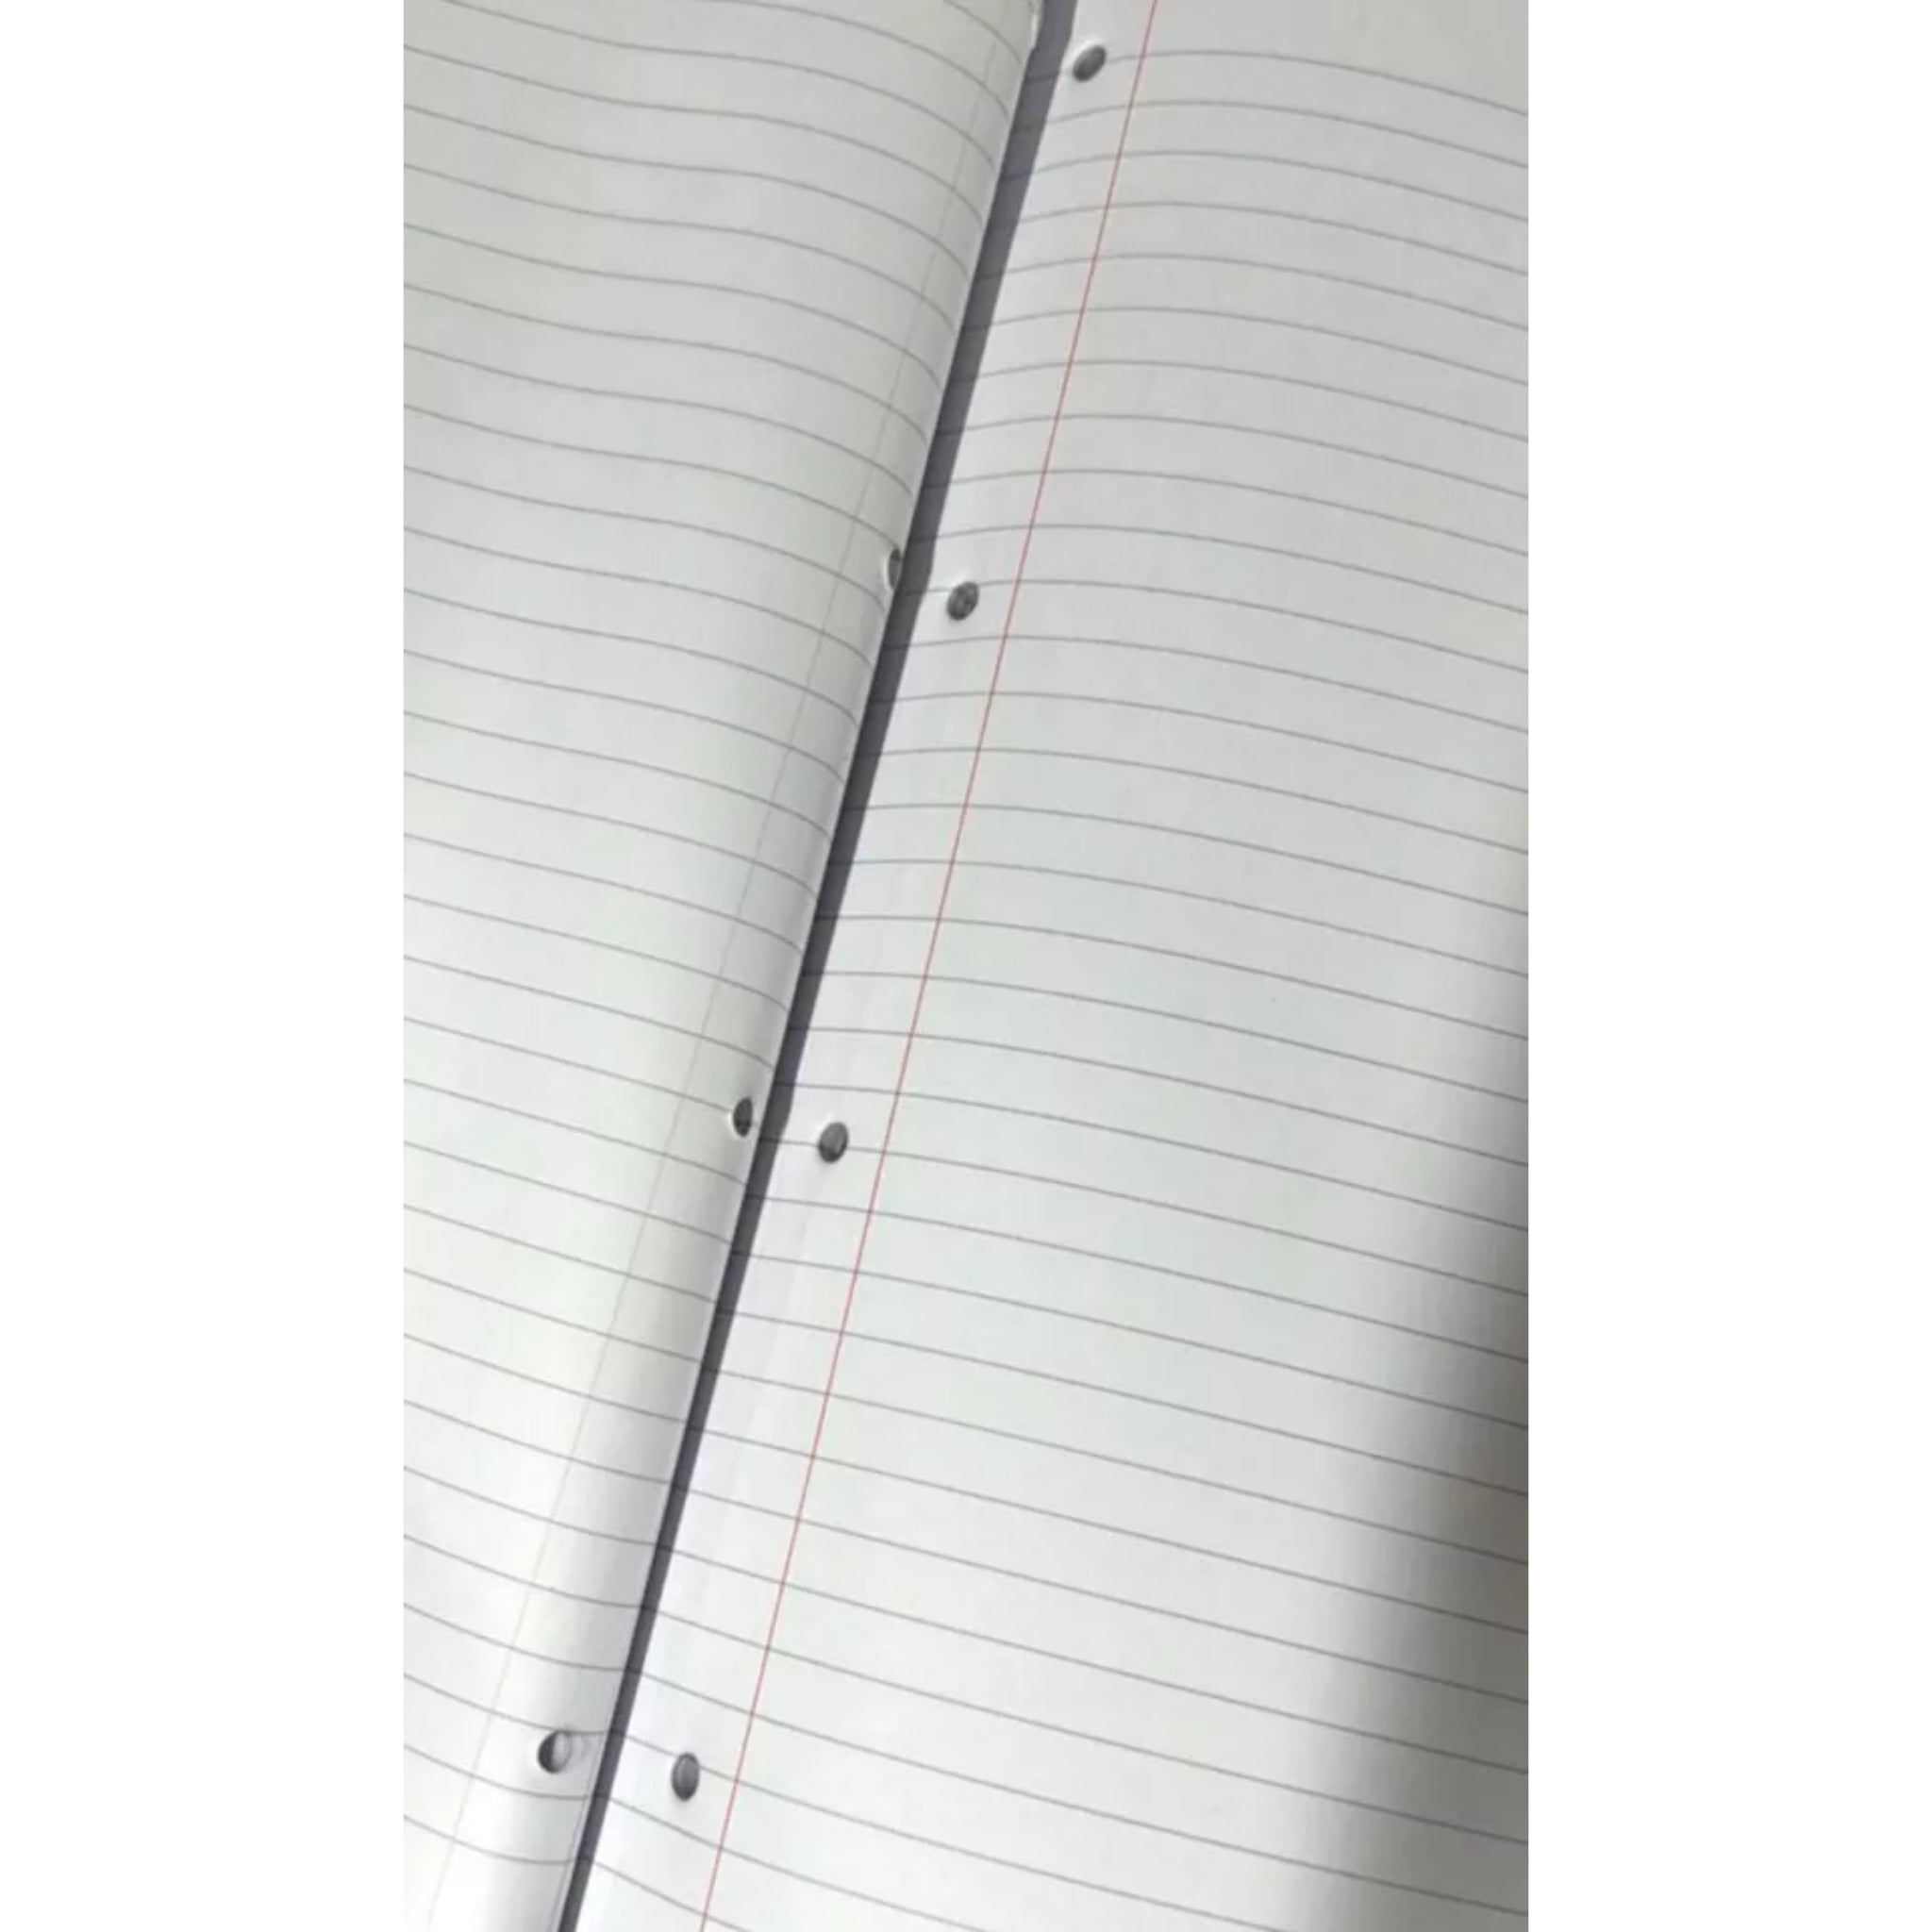 Beclen Harp 2x A4 lined Refill Pad 100 Page Notepad Memo Writing Ruled Student Office School